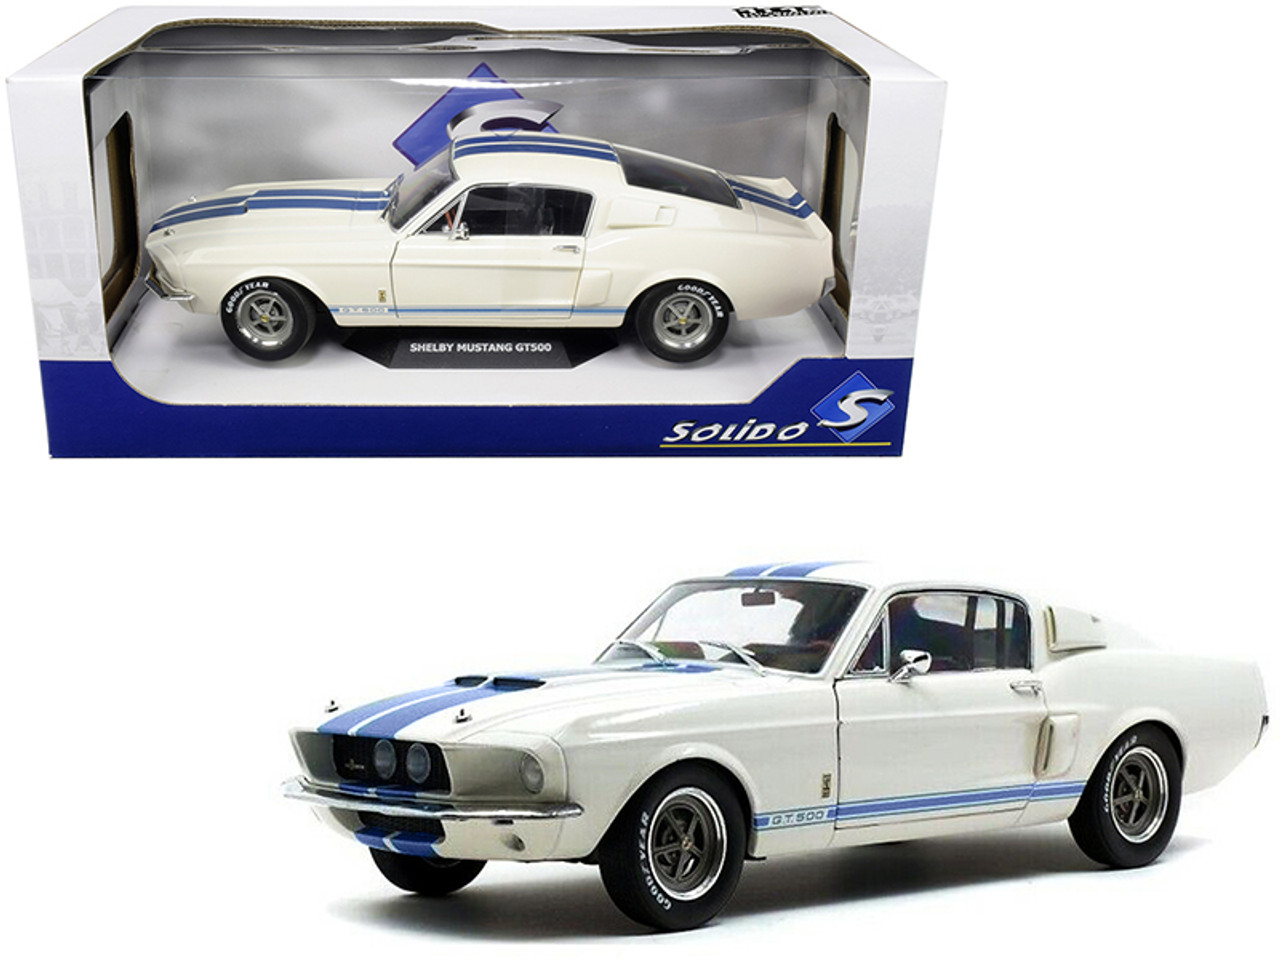 Diecast model Ford Mustang Shelby GT500 (1967), scale 1:18, Greenlight